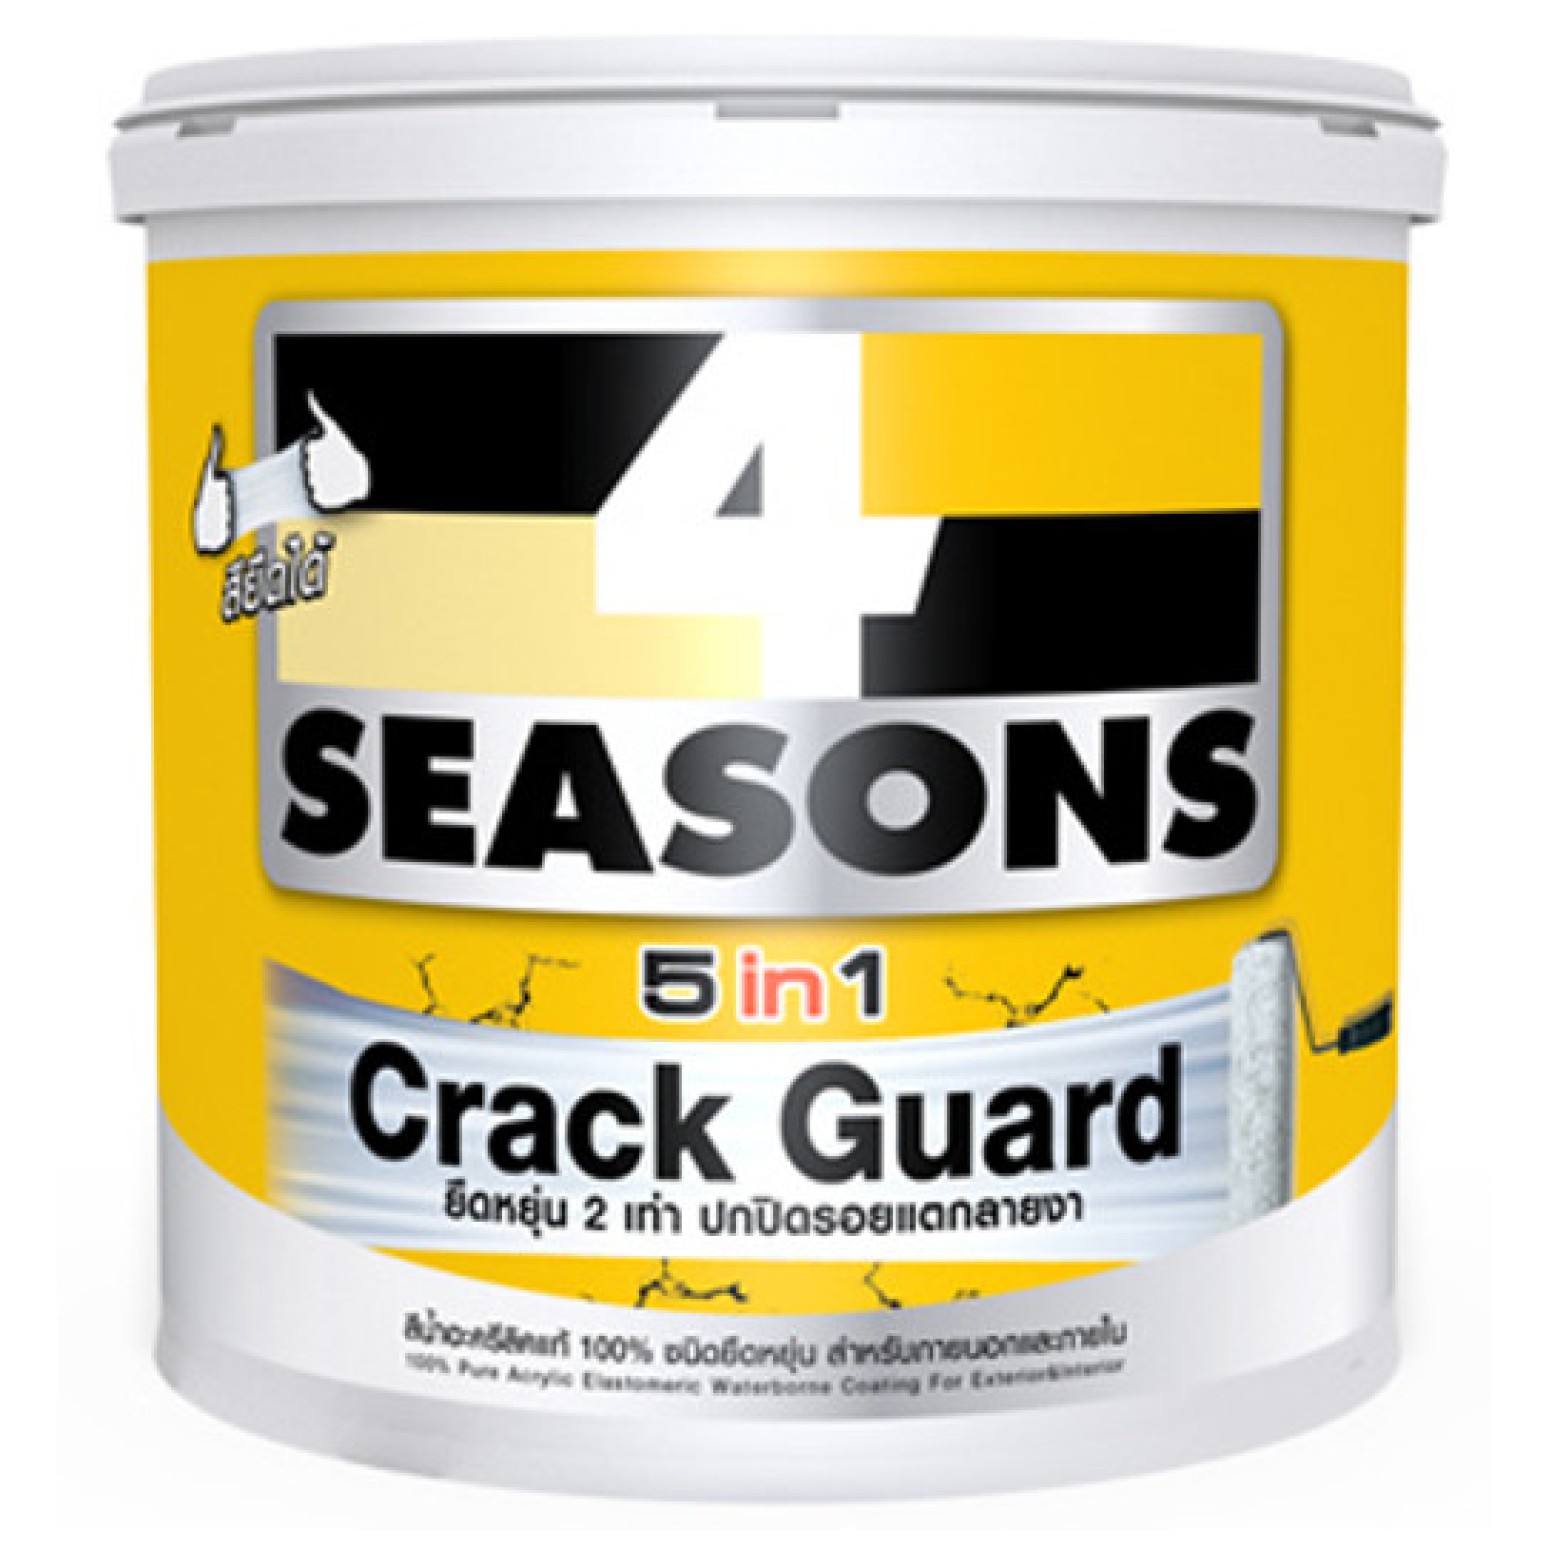 TOA 4 Seasons 5in1 Crack Guard Sheen 7326 Soothing Sapphire 3.75L